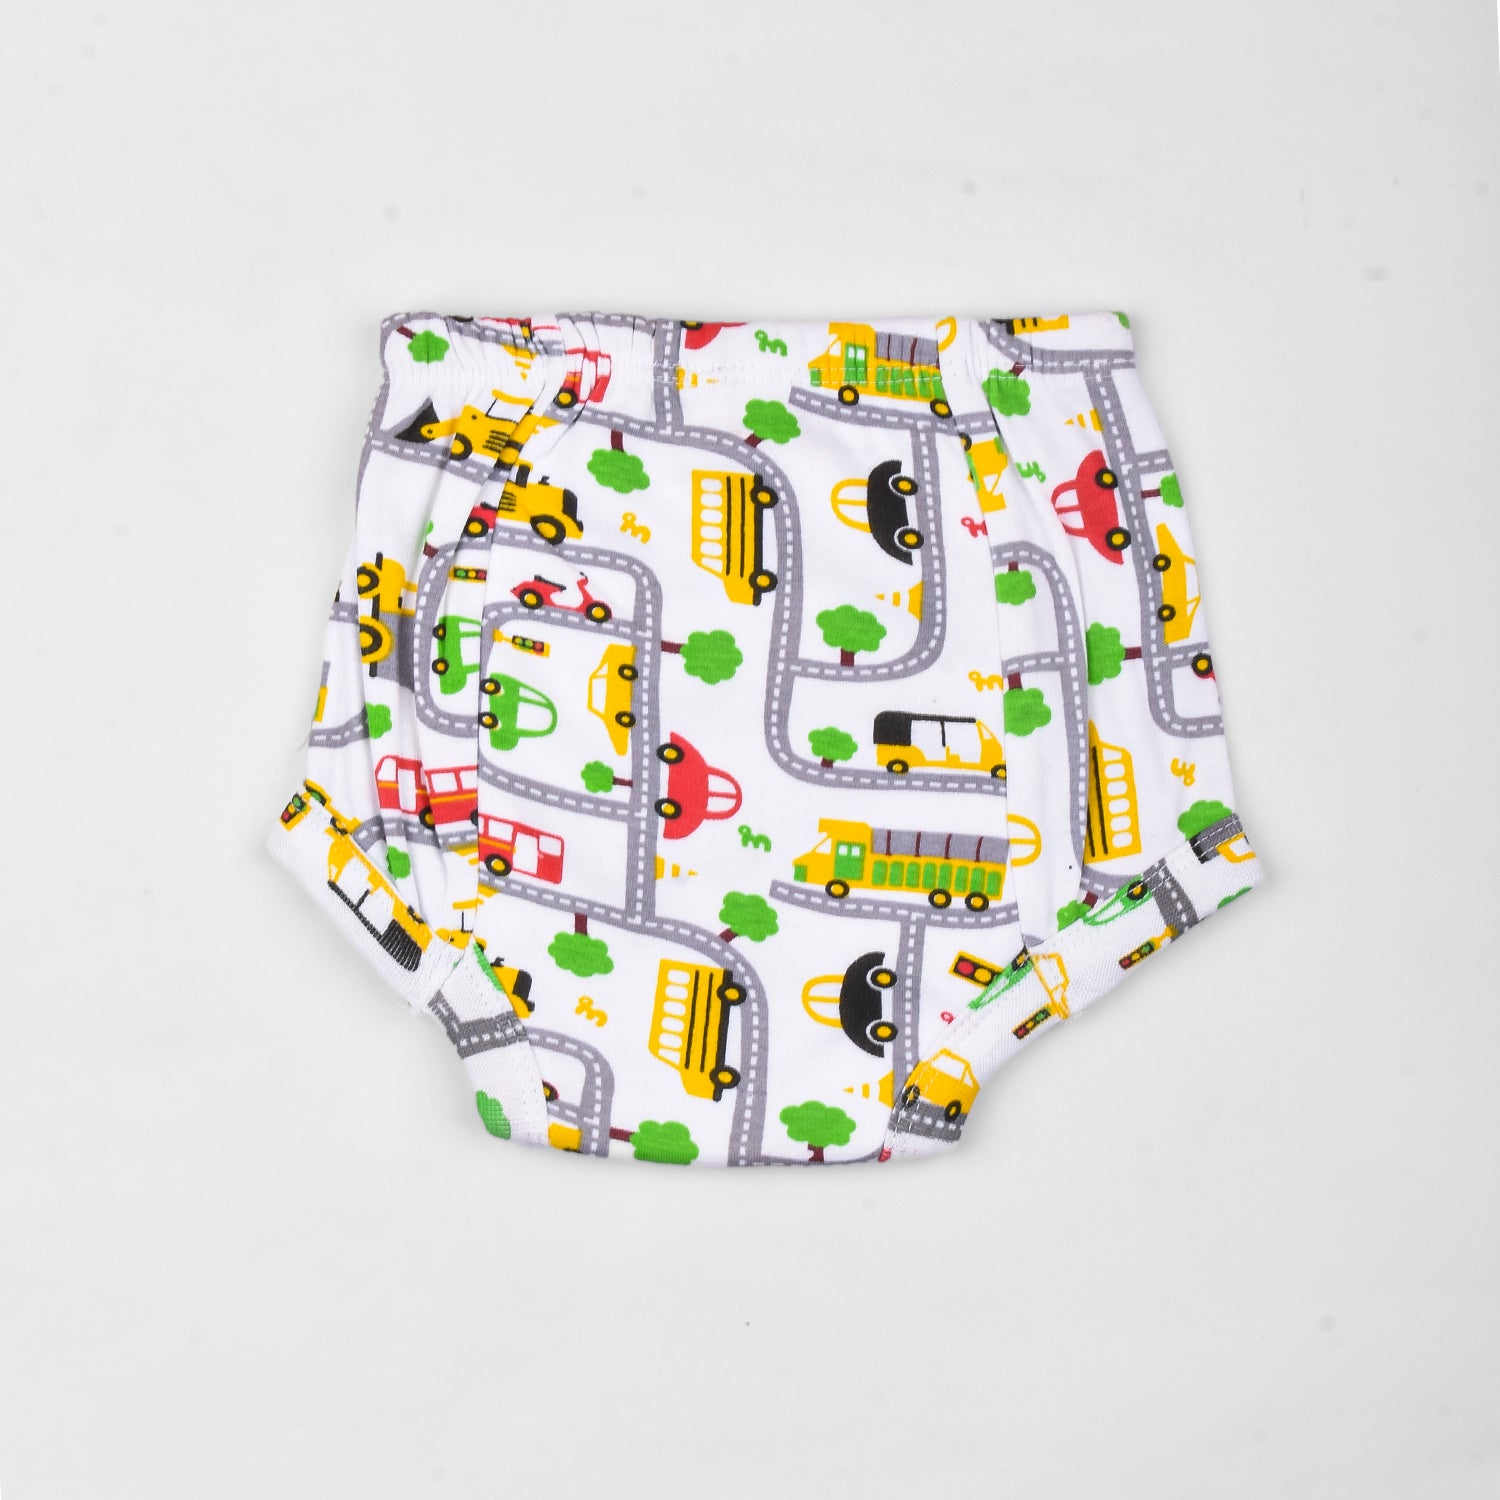 Baby Cotton Unisex Nappy Combo 1 Padded Underwear, 1 Printed Diaper - Multicolor - 3-6 Months